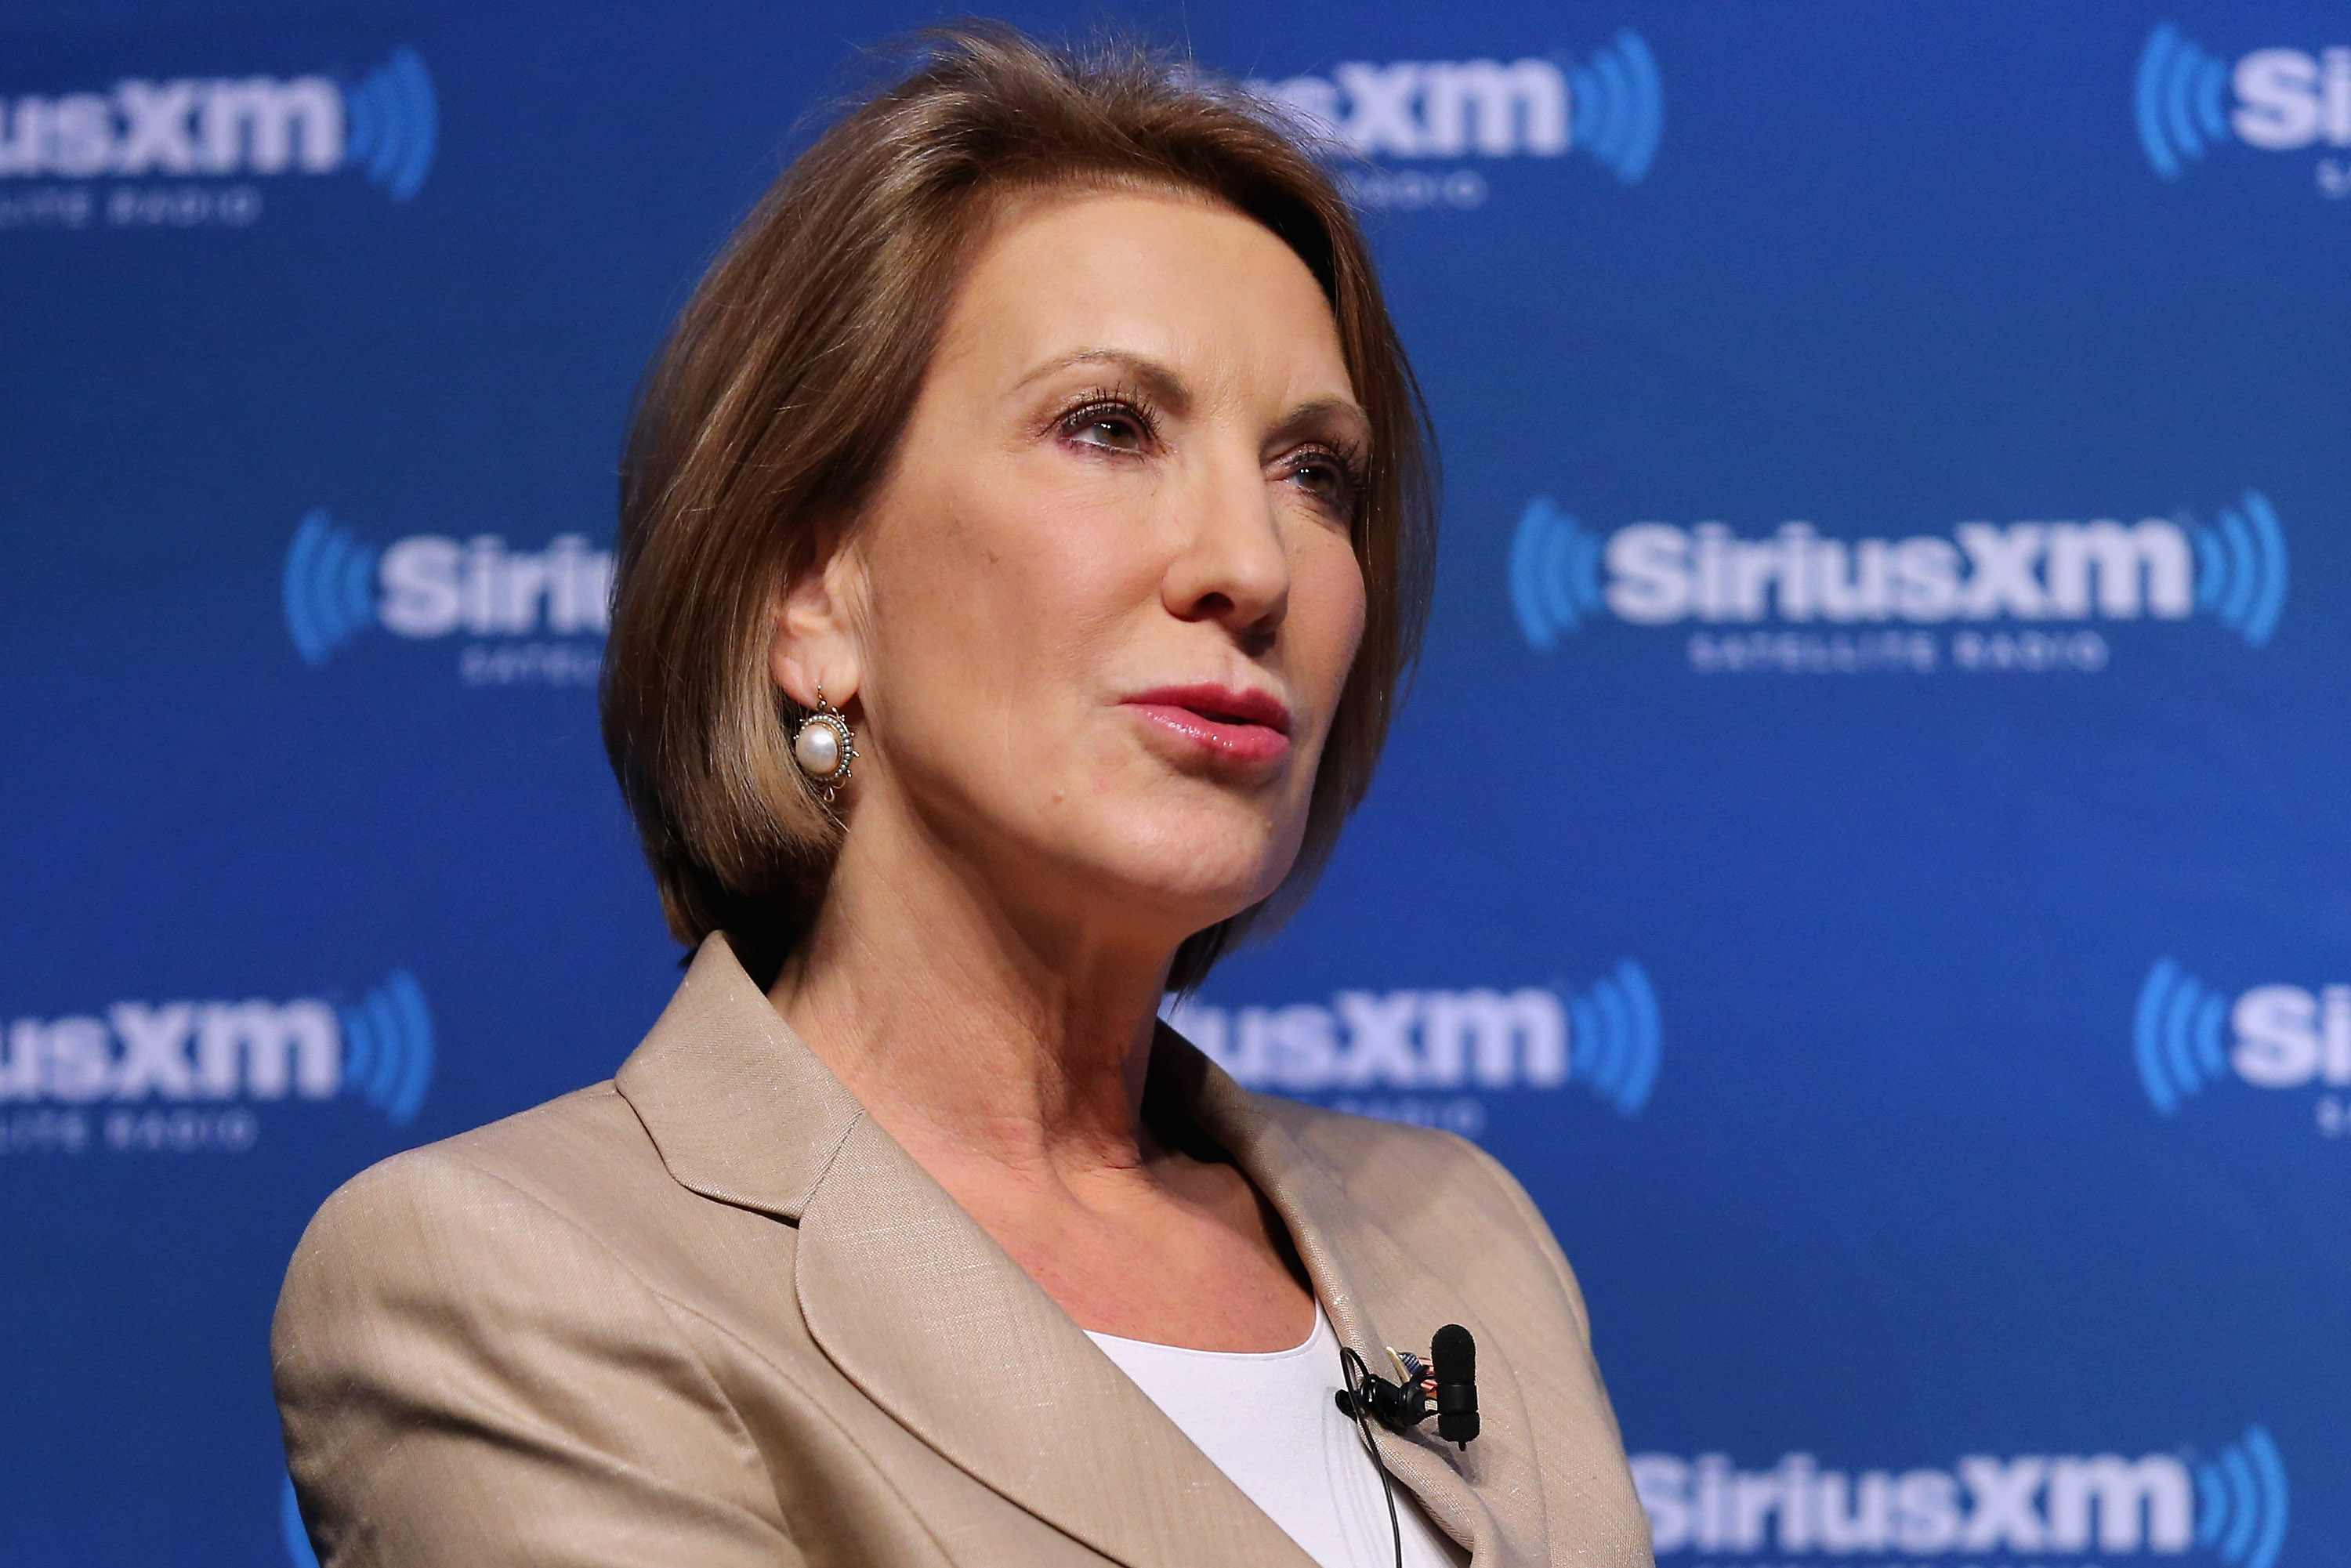 Fiorina during better days for her candidacy.